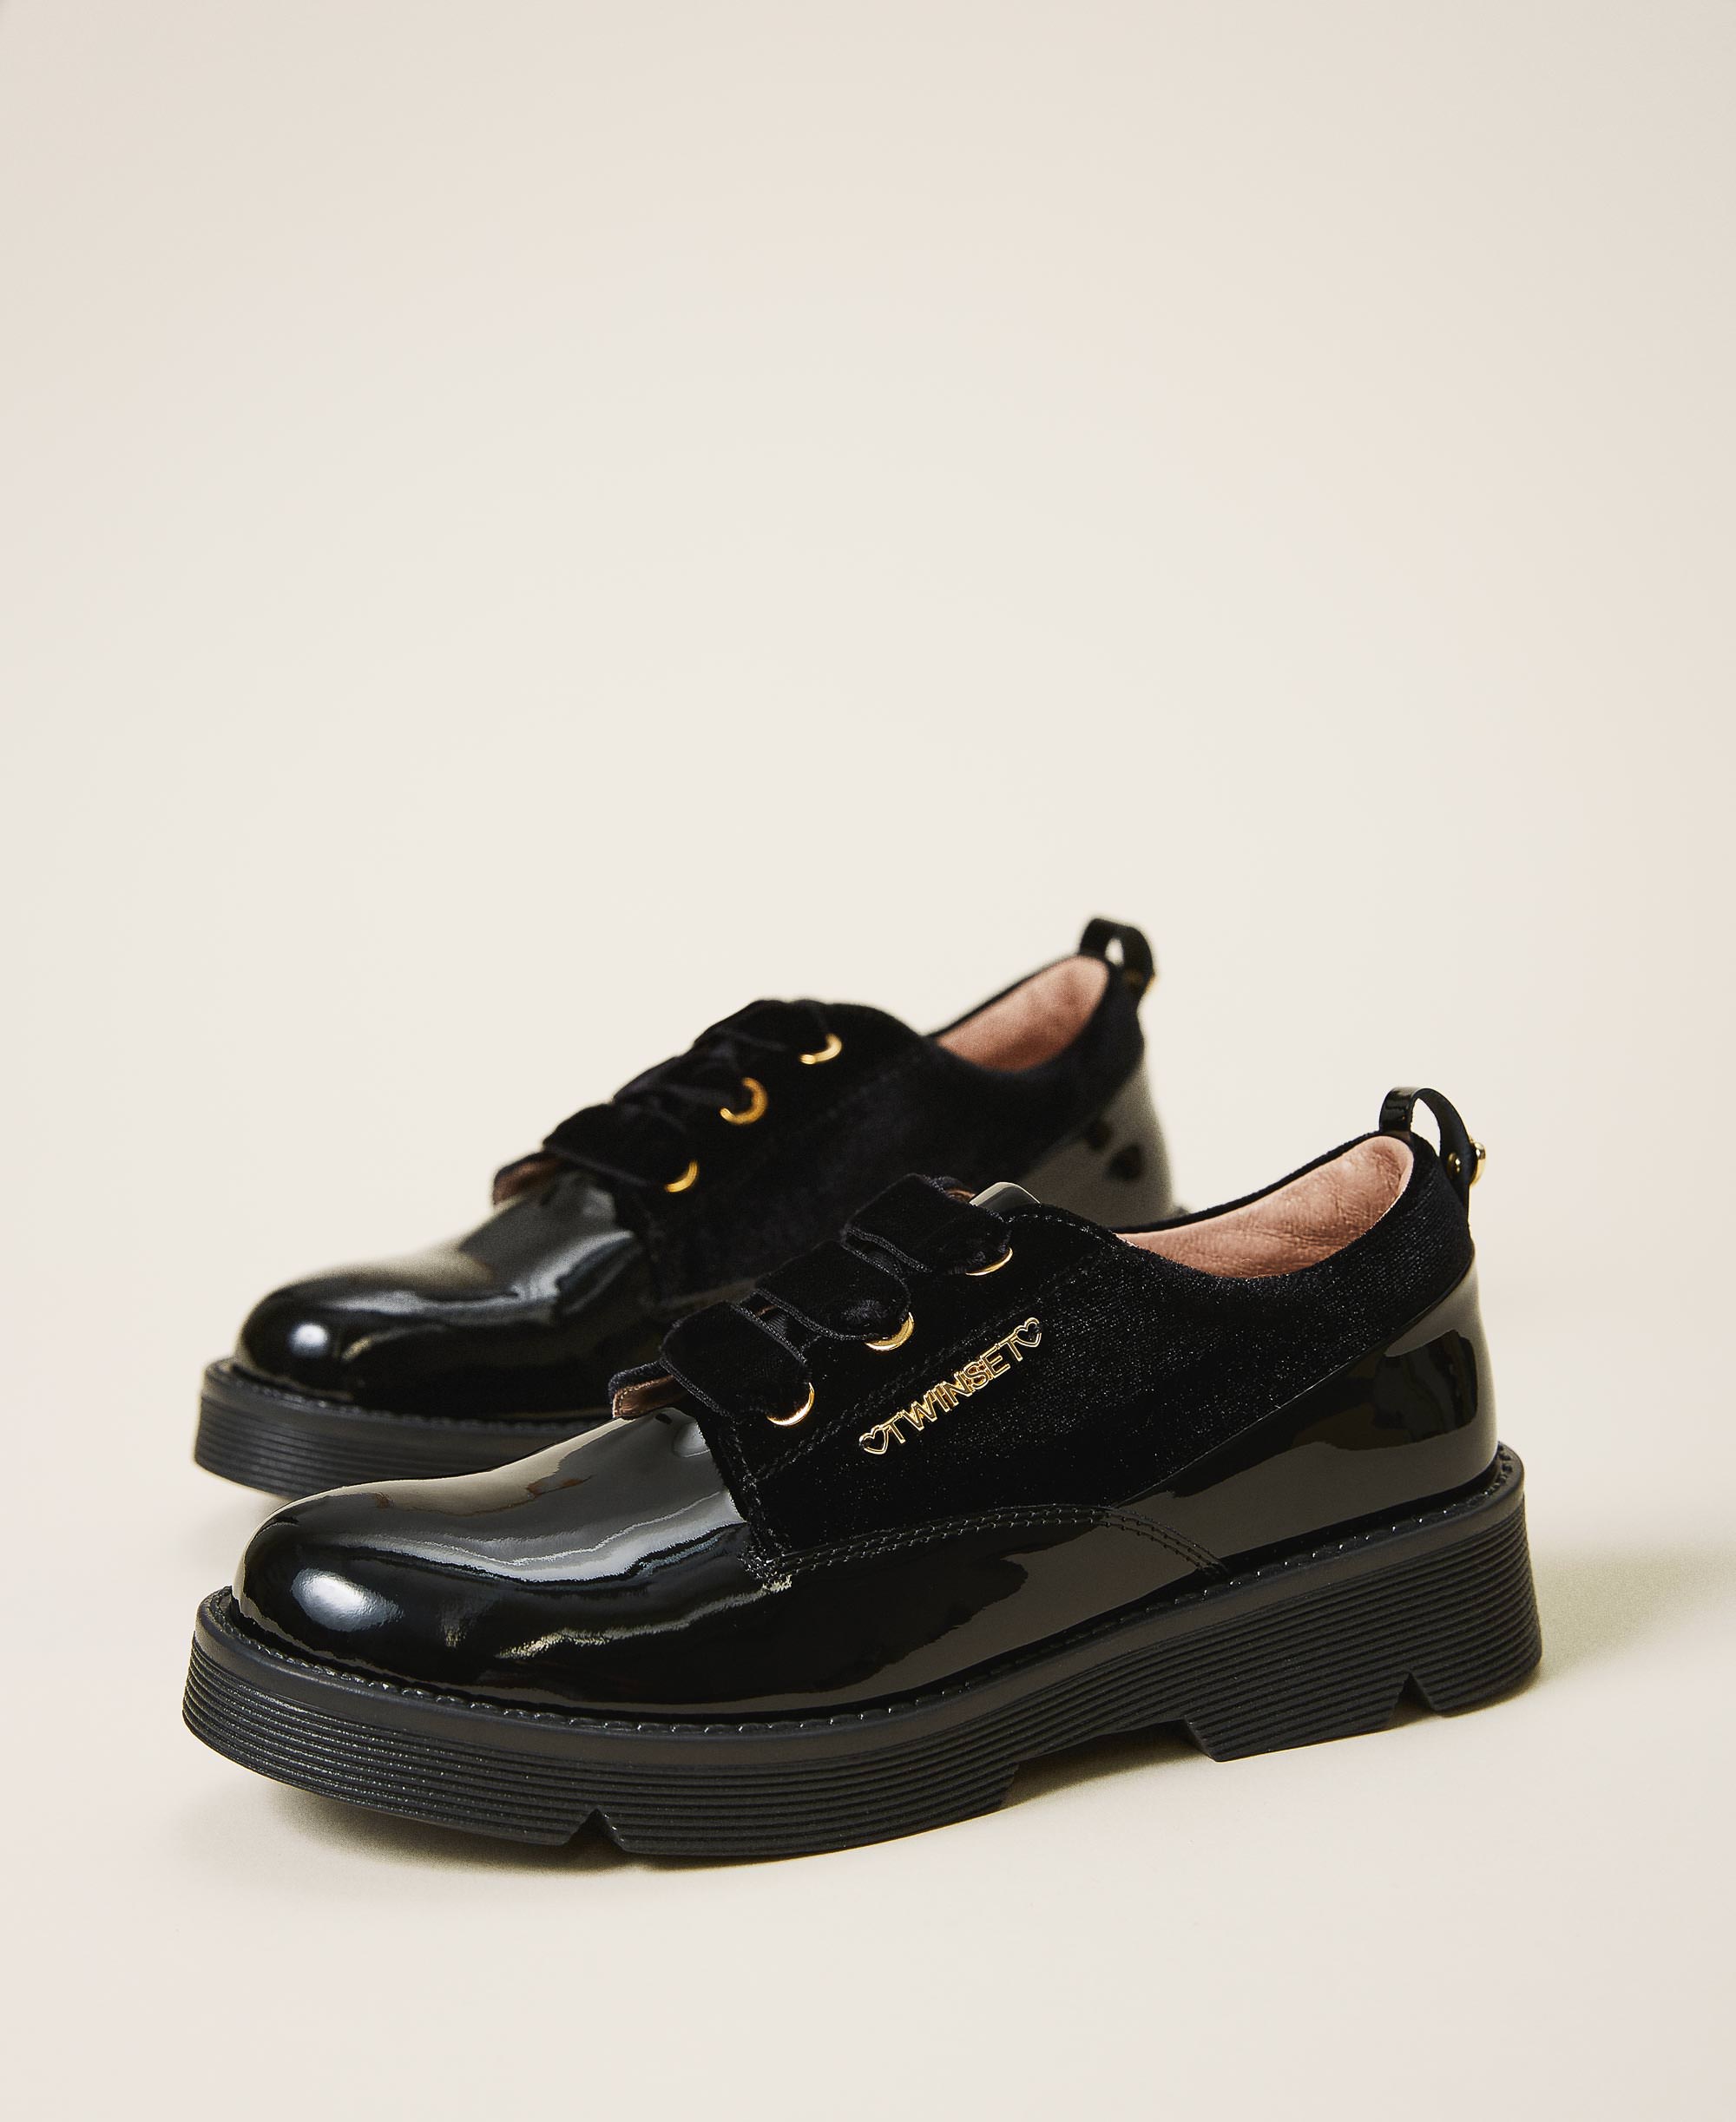 Patent leather tie-up shoes Child 